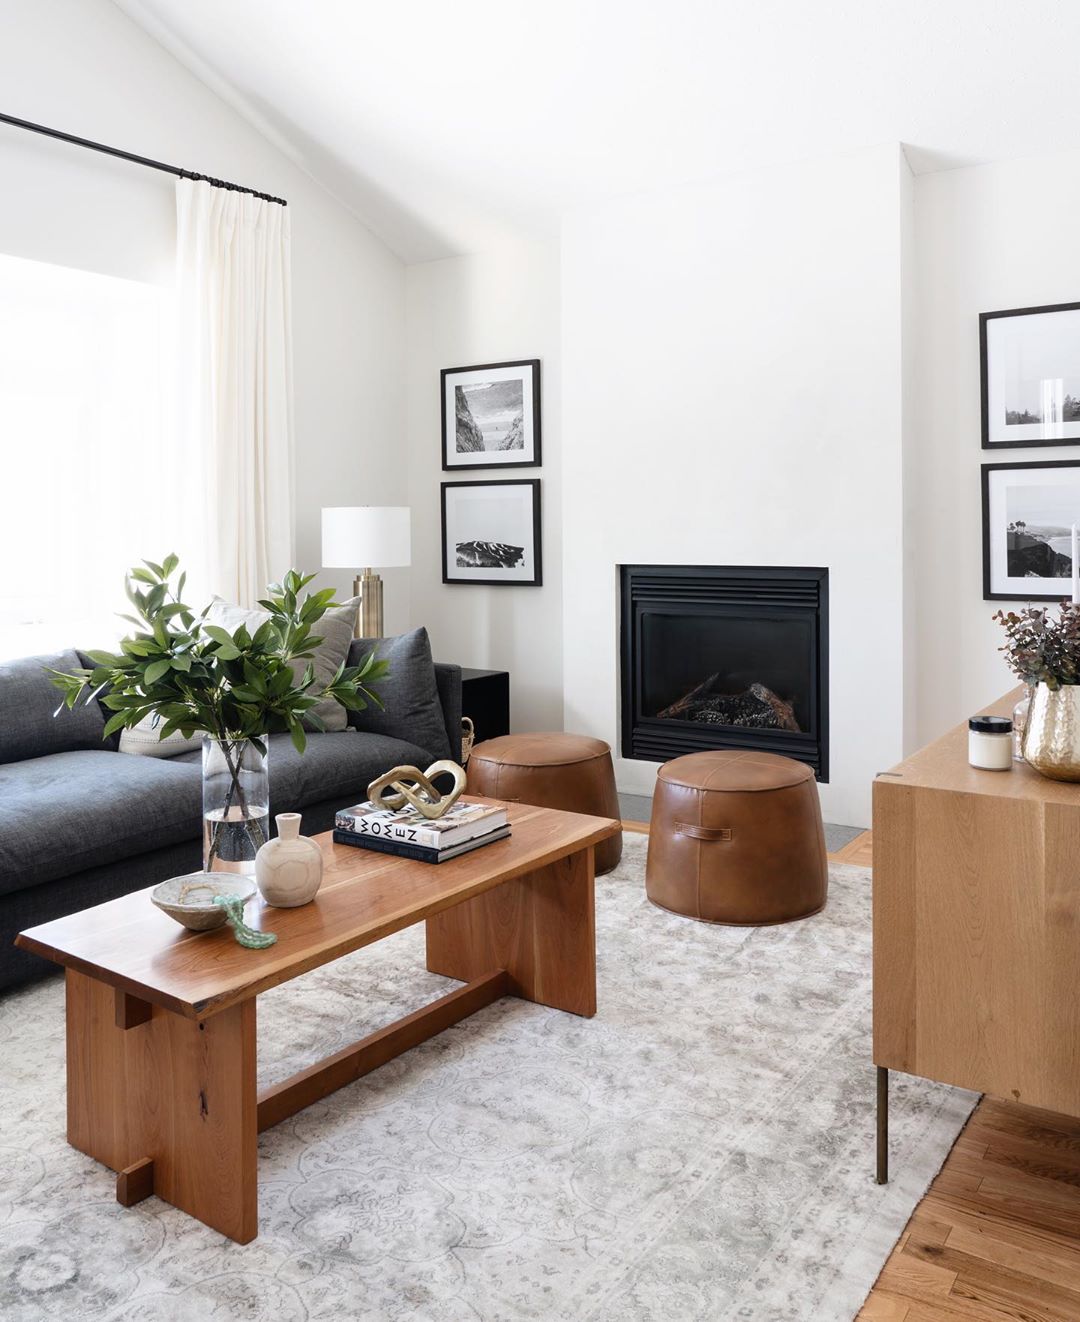 Modern Living Room Design Built Around Typical Furniture. Photo by Instagram user @leclairdecor